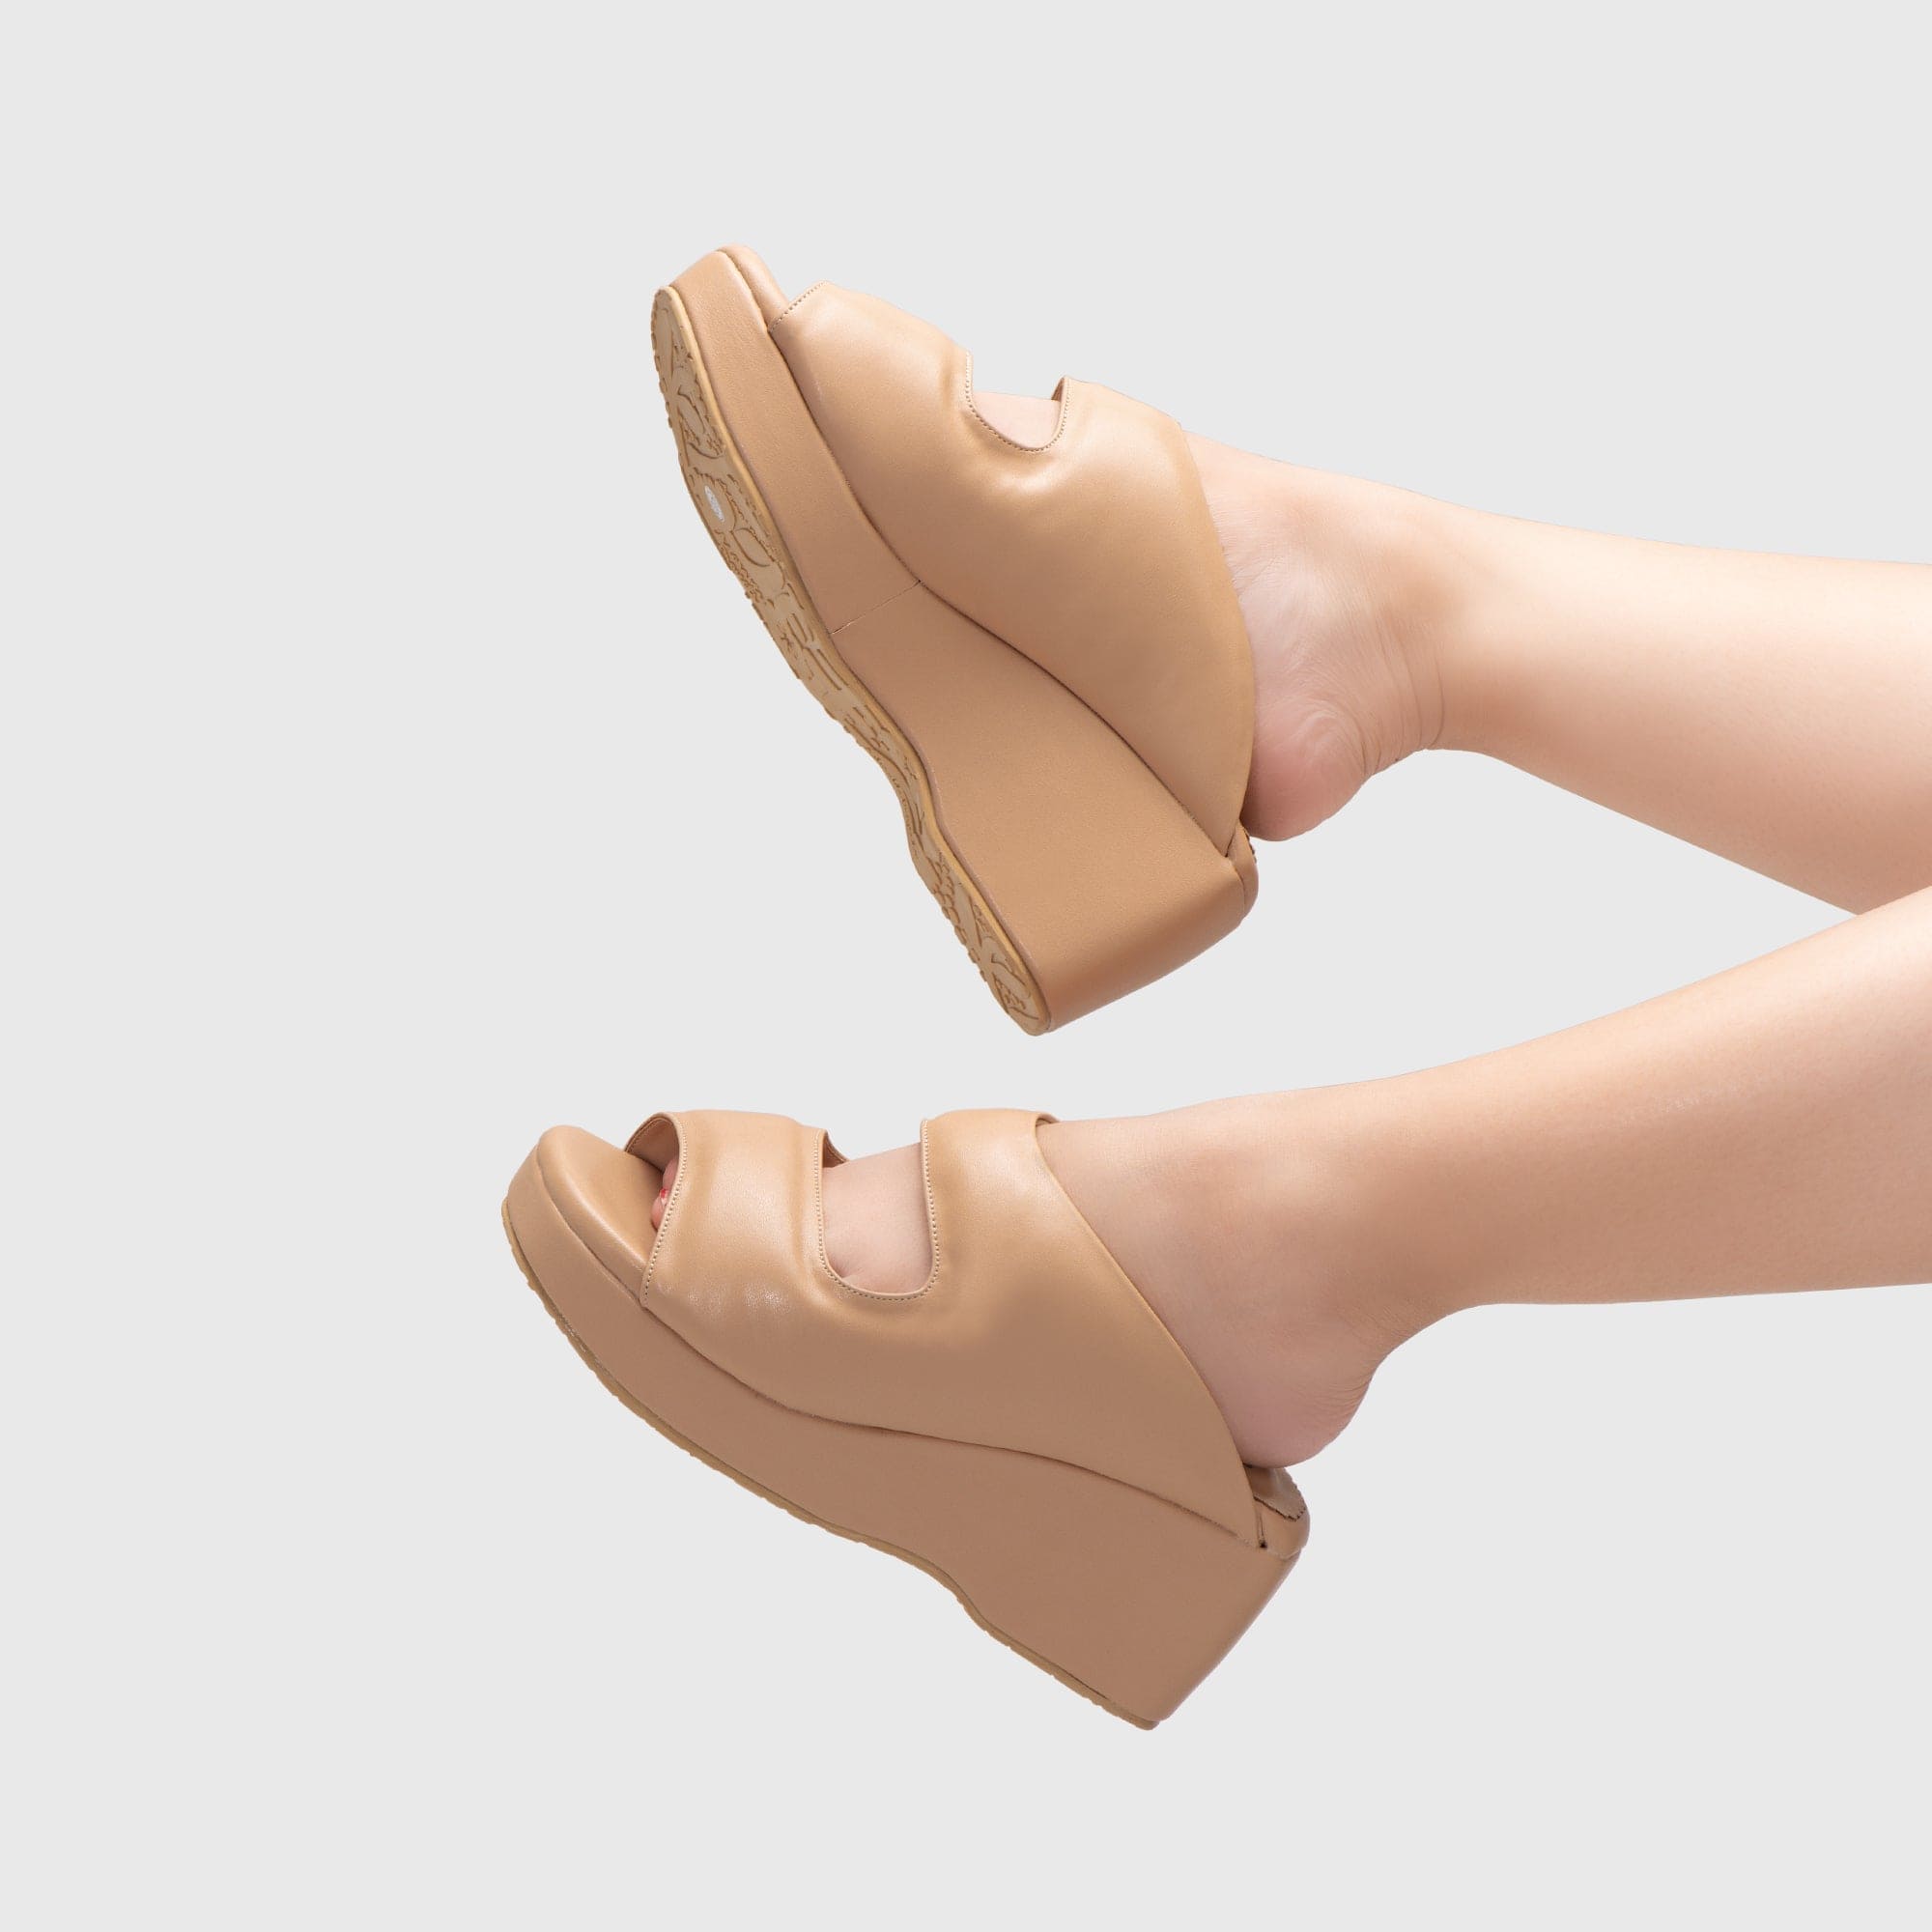 Adorable Projects Official Wedges Annecy Wedges Nude